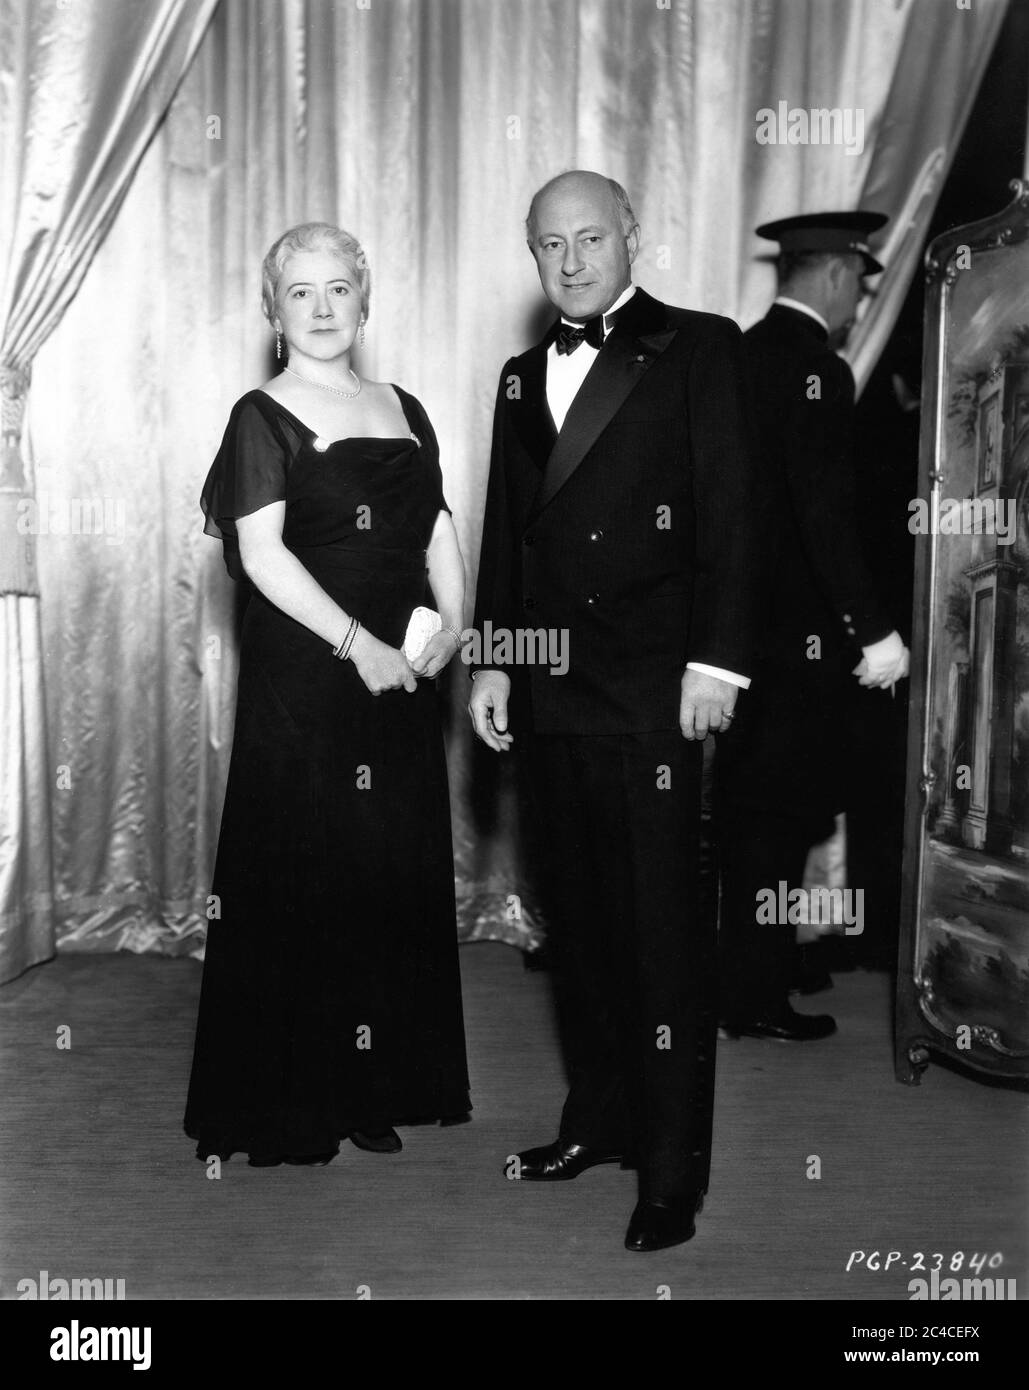 Movie Director CECIL B. DeMILLE and his wife CONSTANCE at a Hollywood Movie  Premiere circa 1932 Paramount Pictures publicity Stock Photo - Alamy